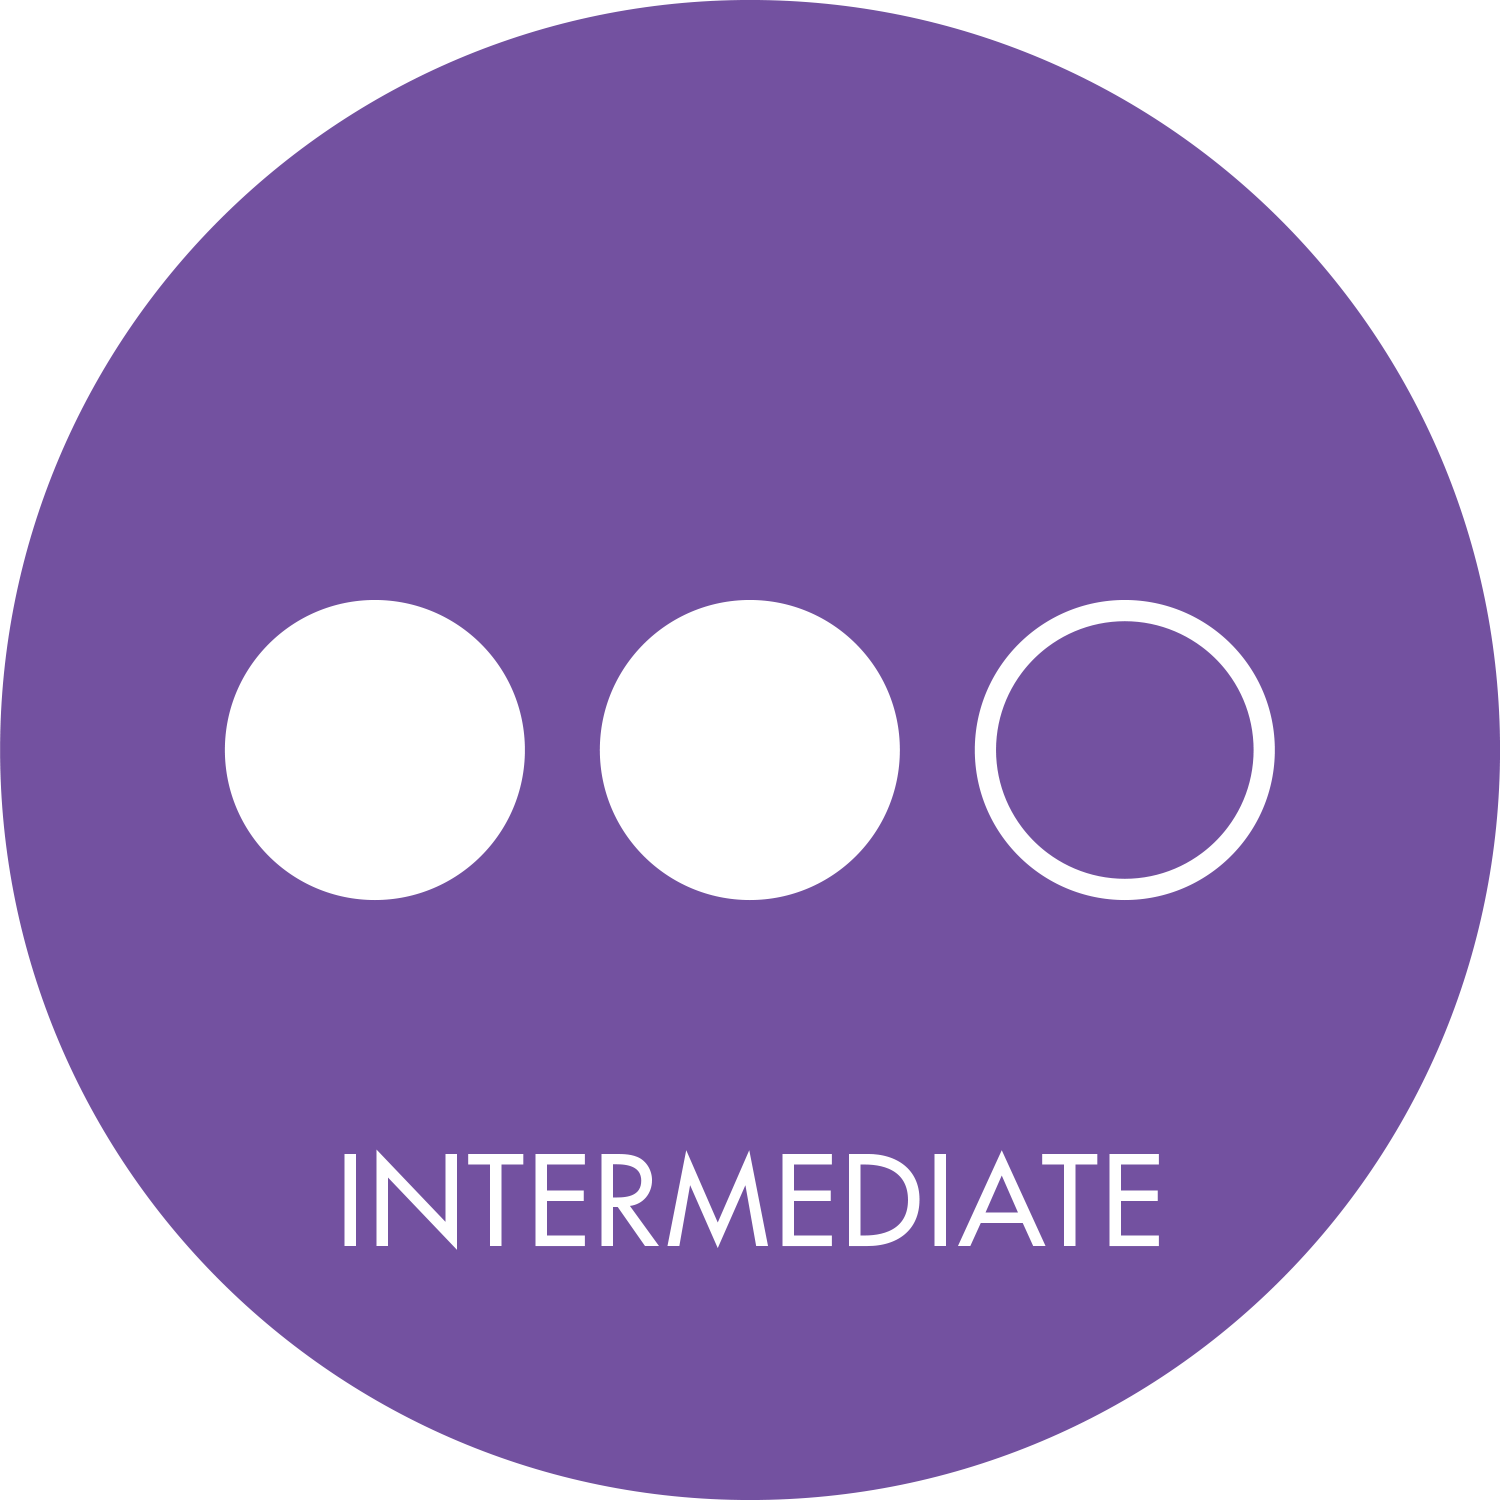 Circle_Icon_Text_Level_Intermediate.png